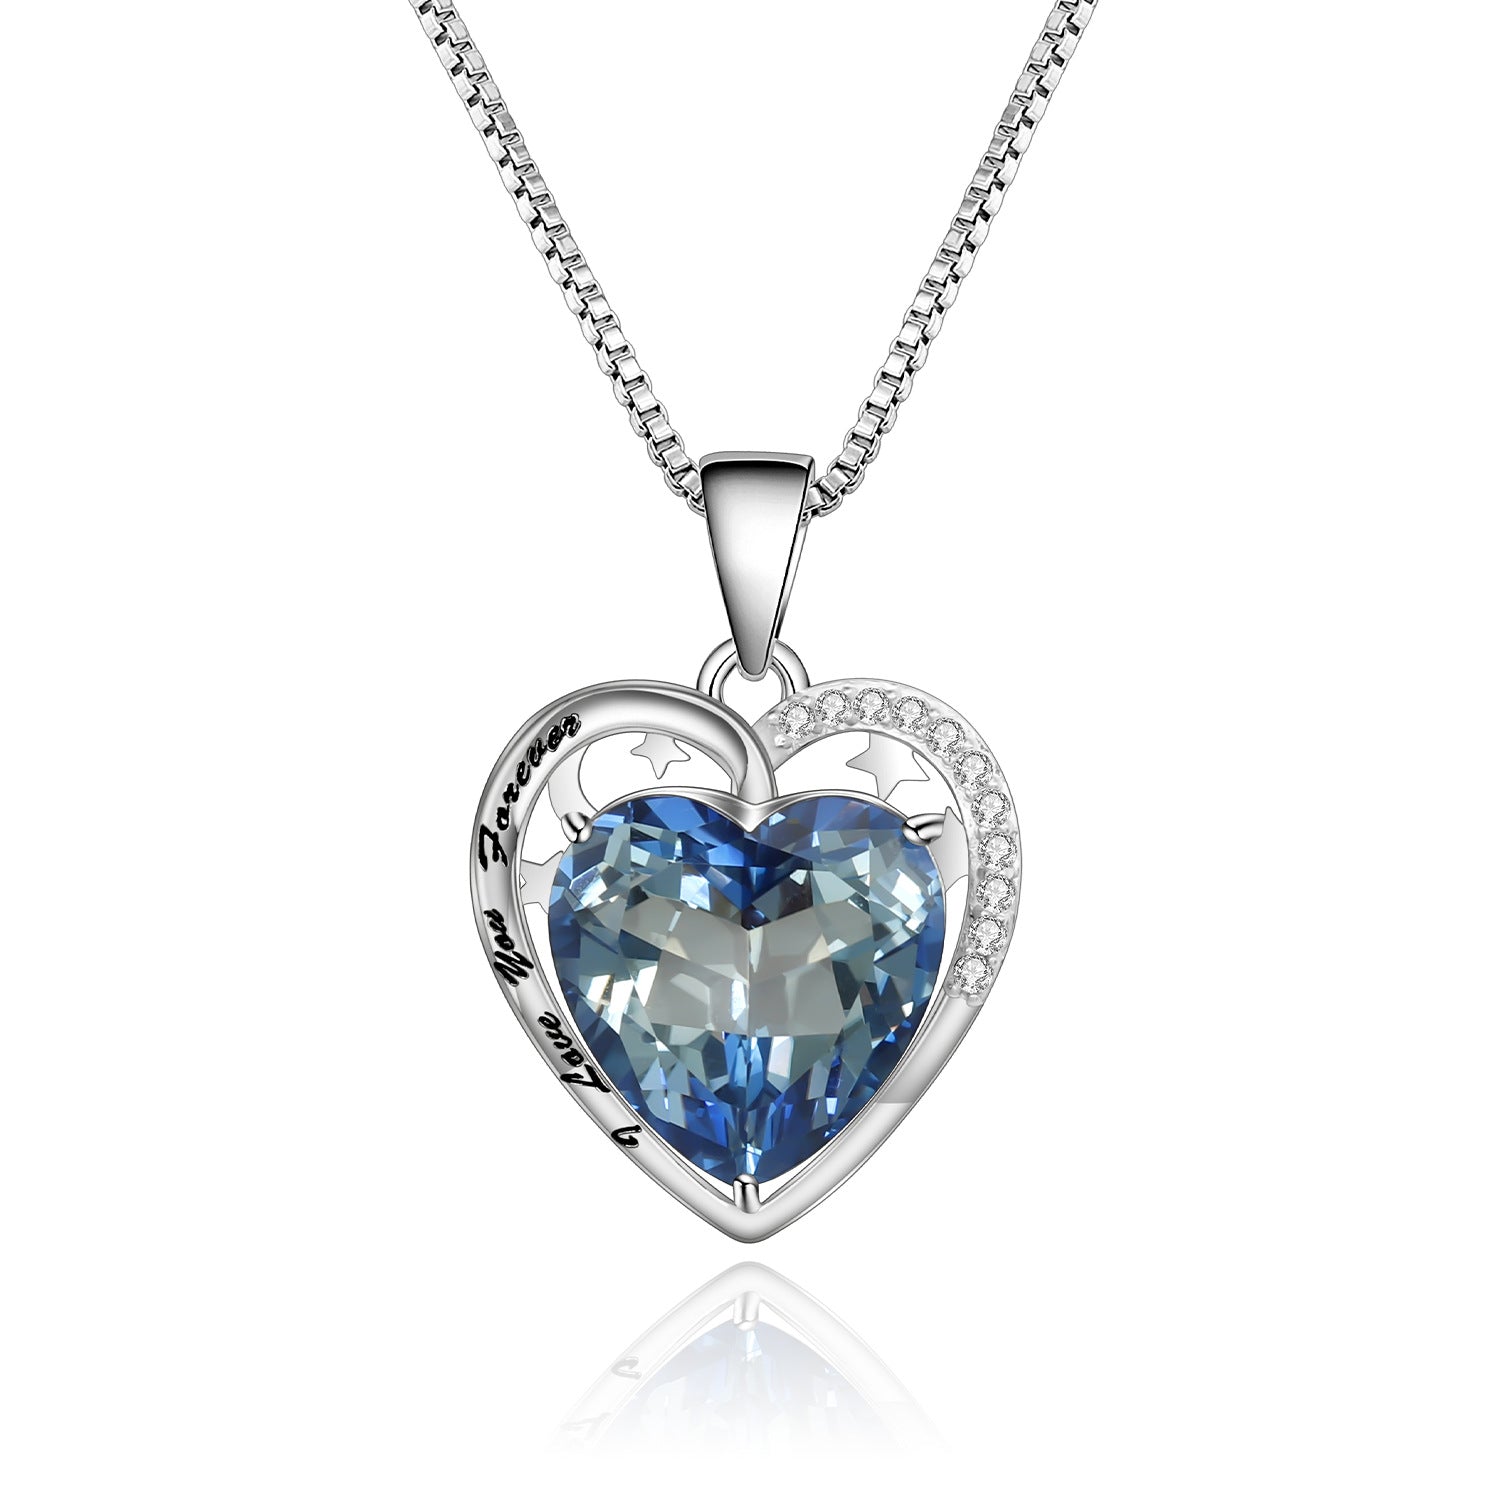 Valentine's Day Gift Luxury Design Colourful Crystal Heart To Heart Love Pendant Silver Necklace for Women